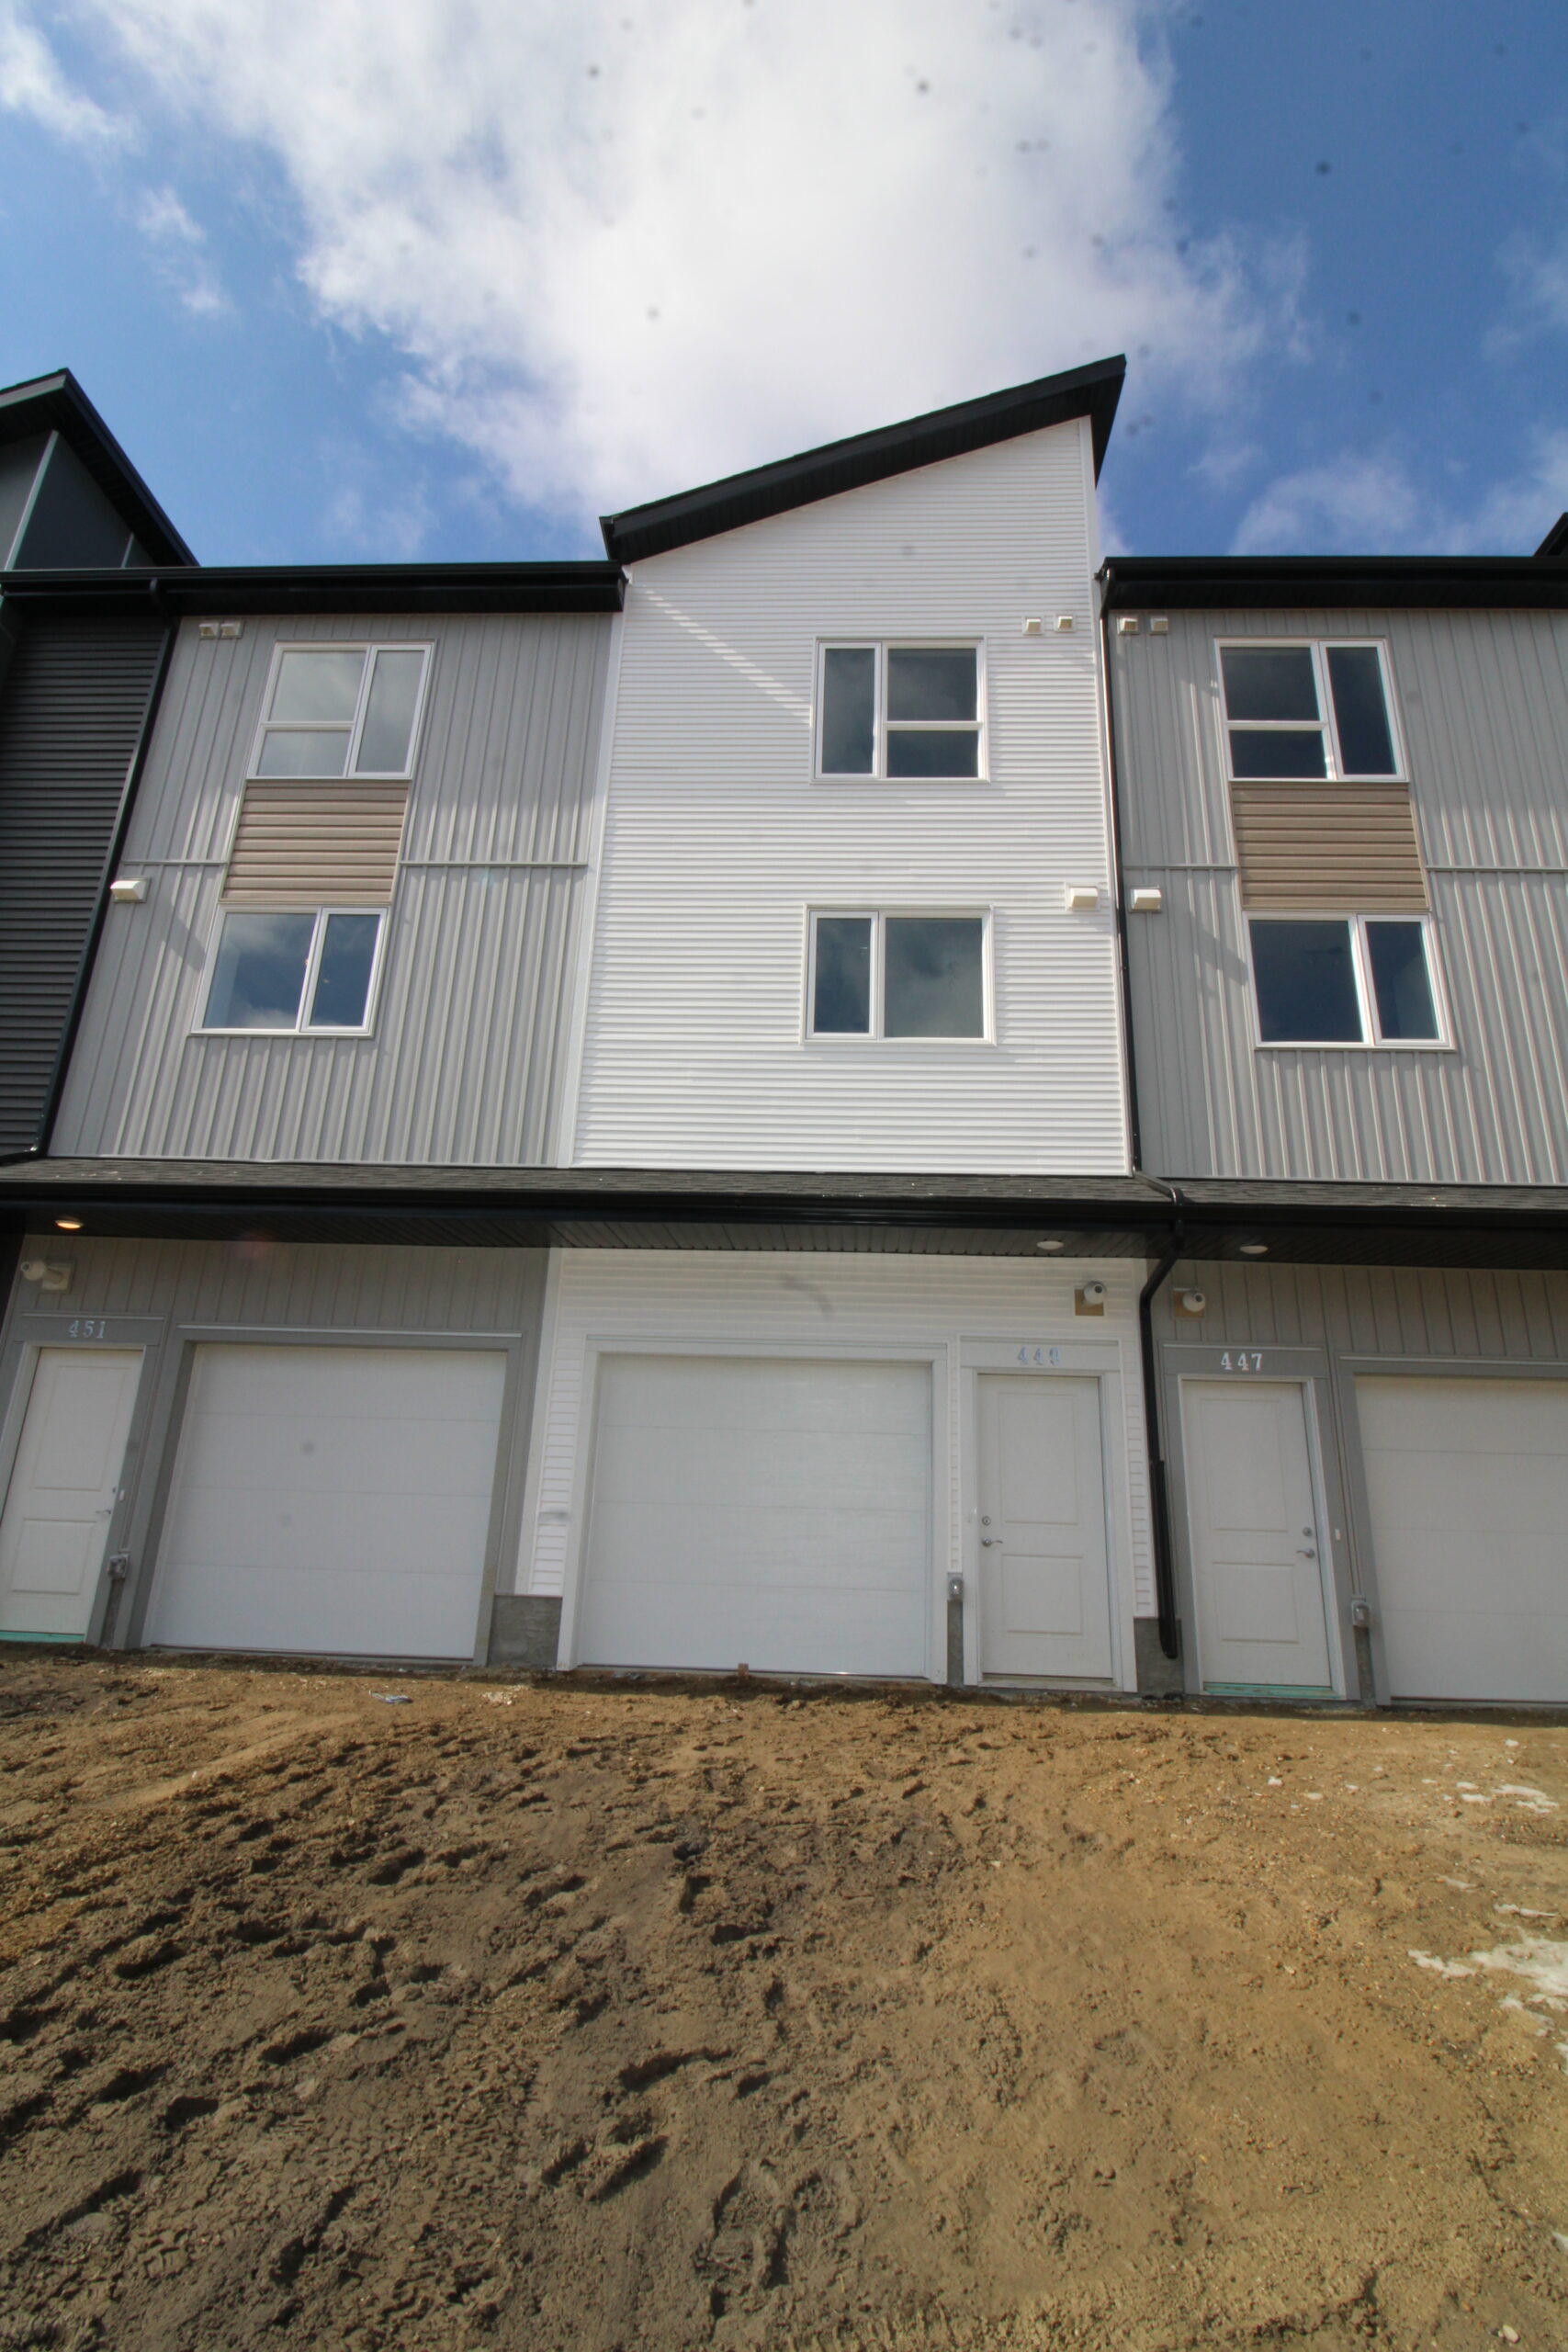 Redstone- Brand New and Modern 2Br/2.5Bath Townhouse with  a Attached Single Garage